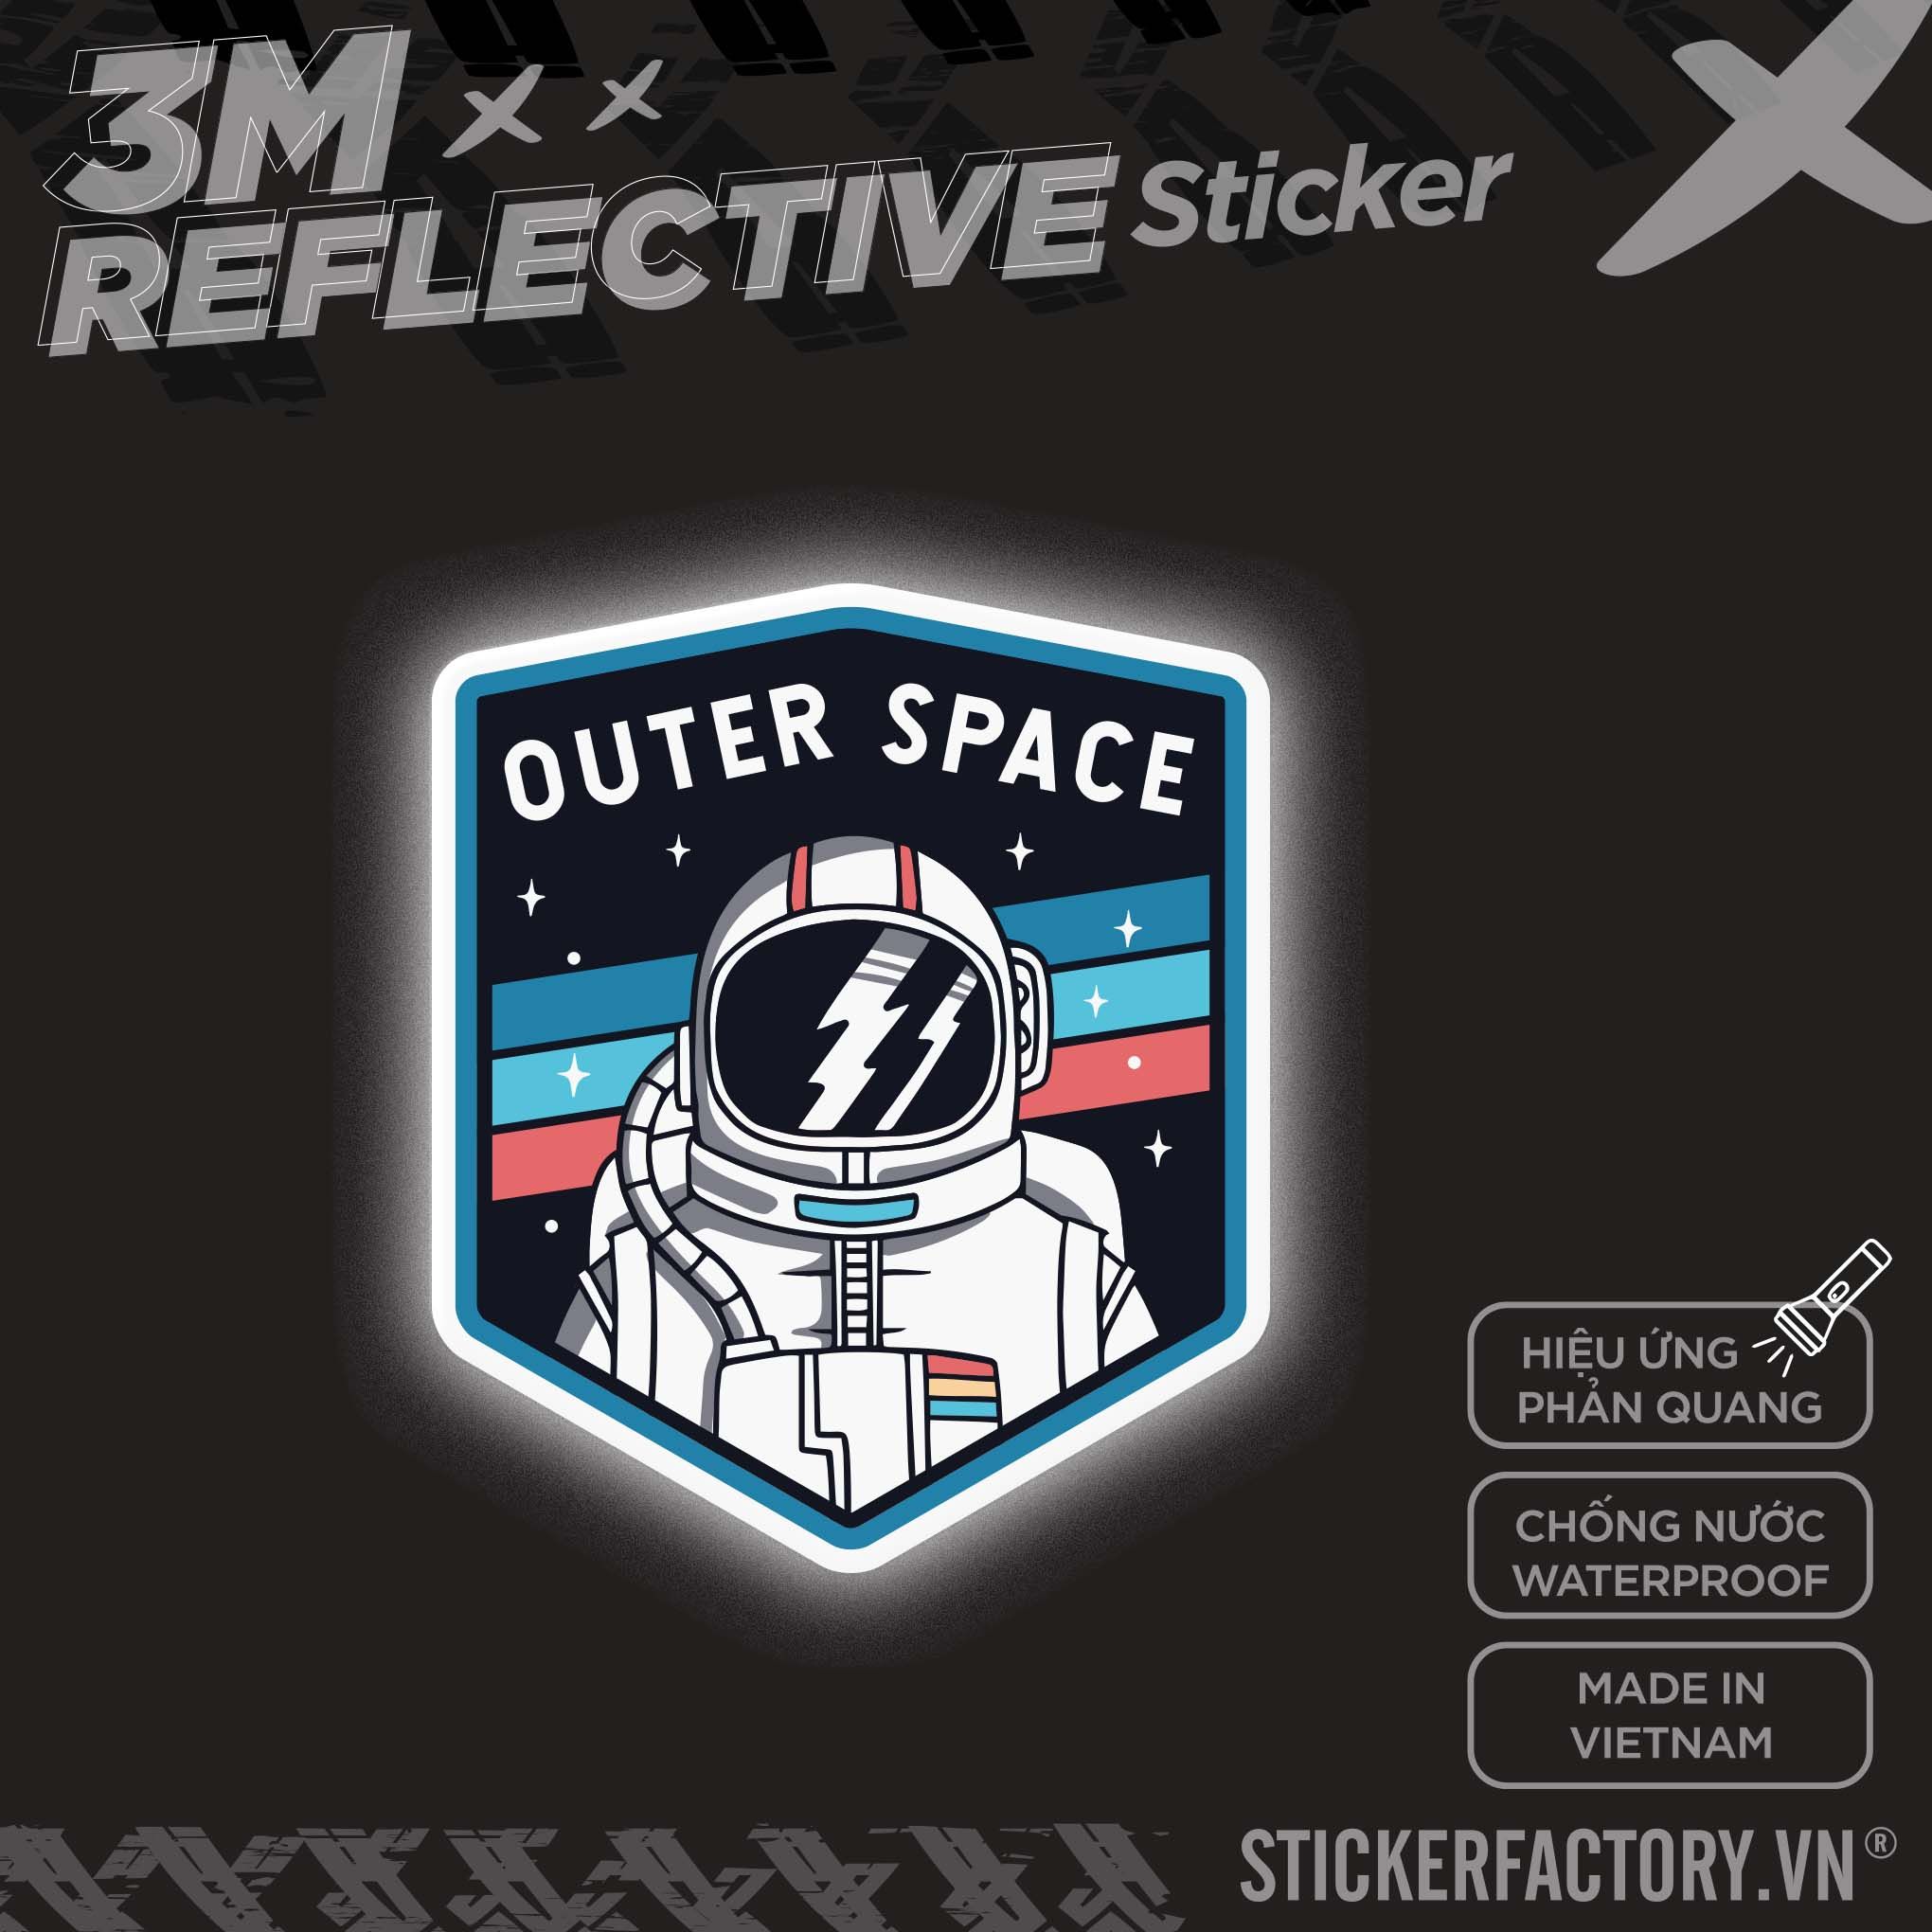 OUTER SPACE LOGO 3M - Reflective Sticker Die-cut